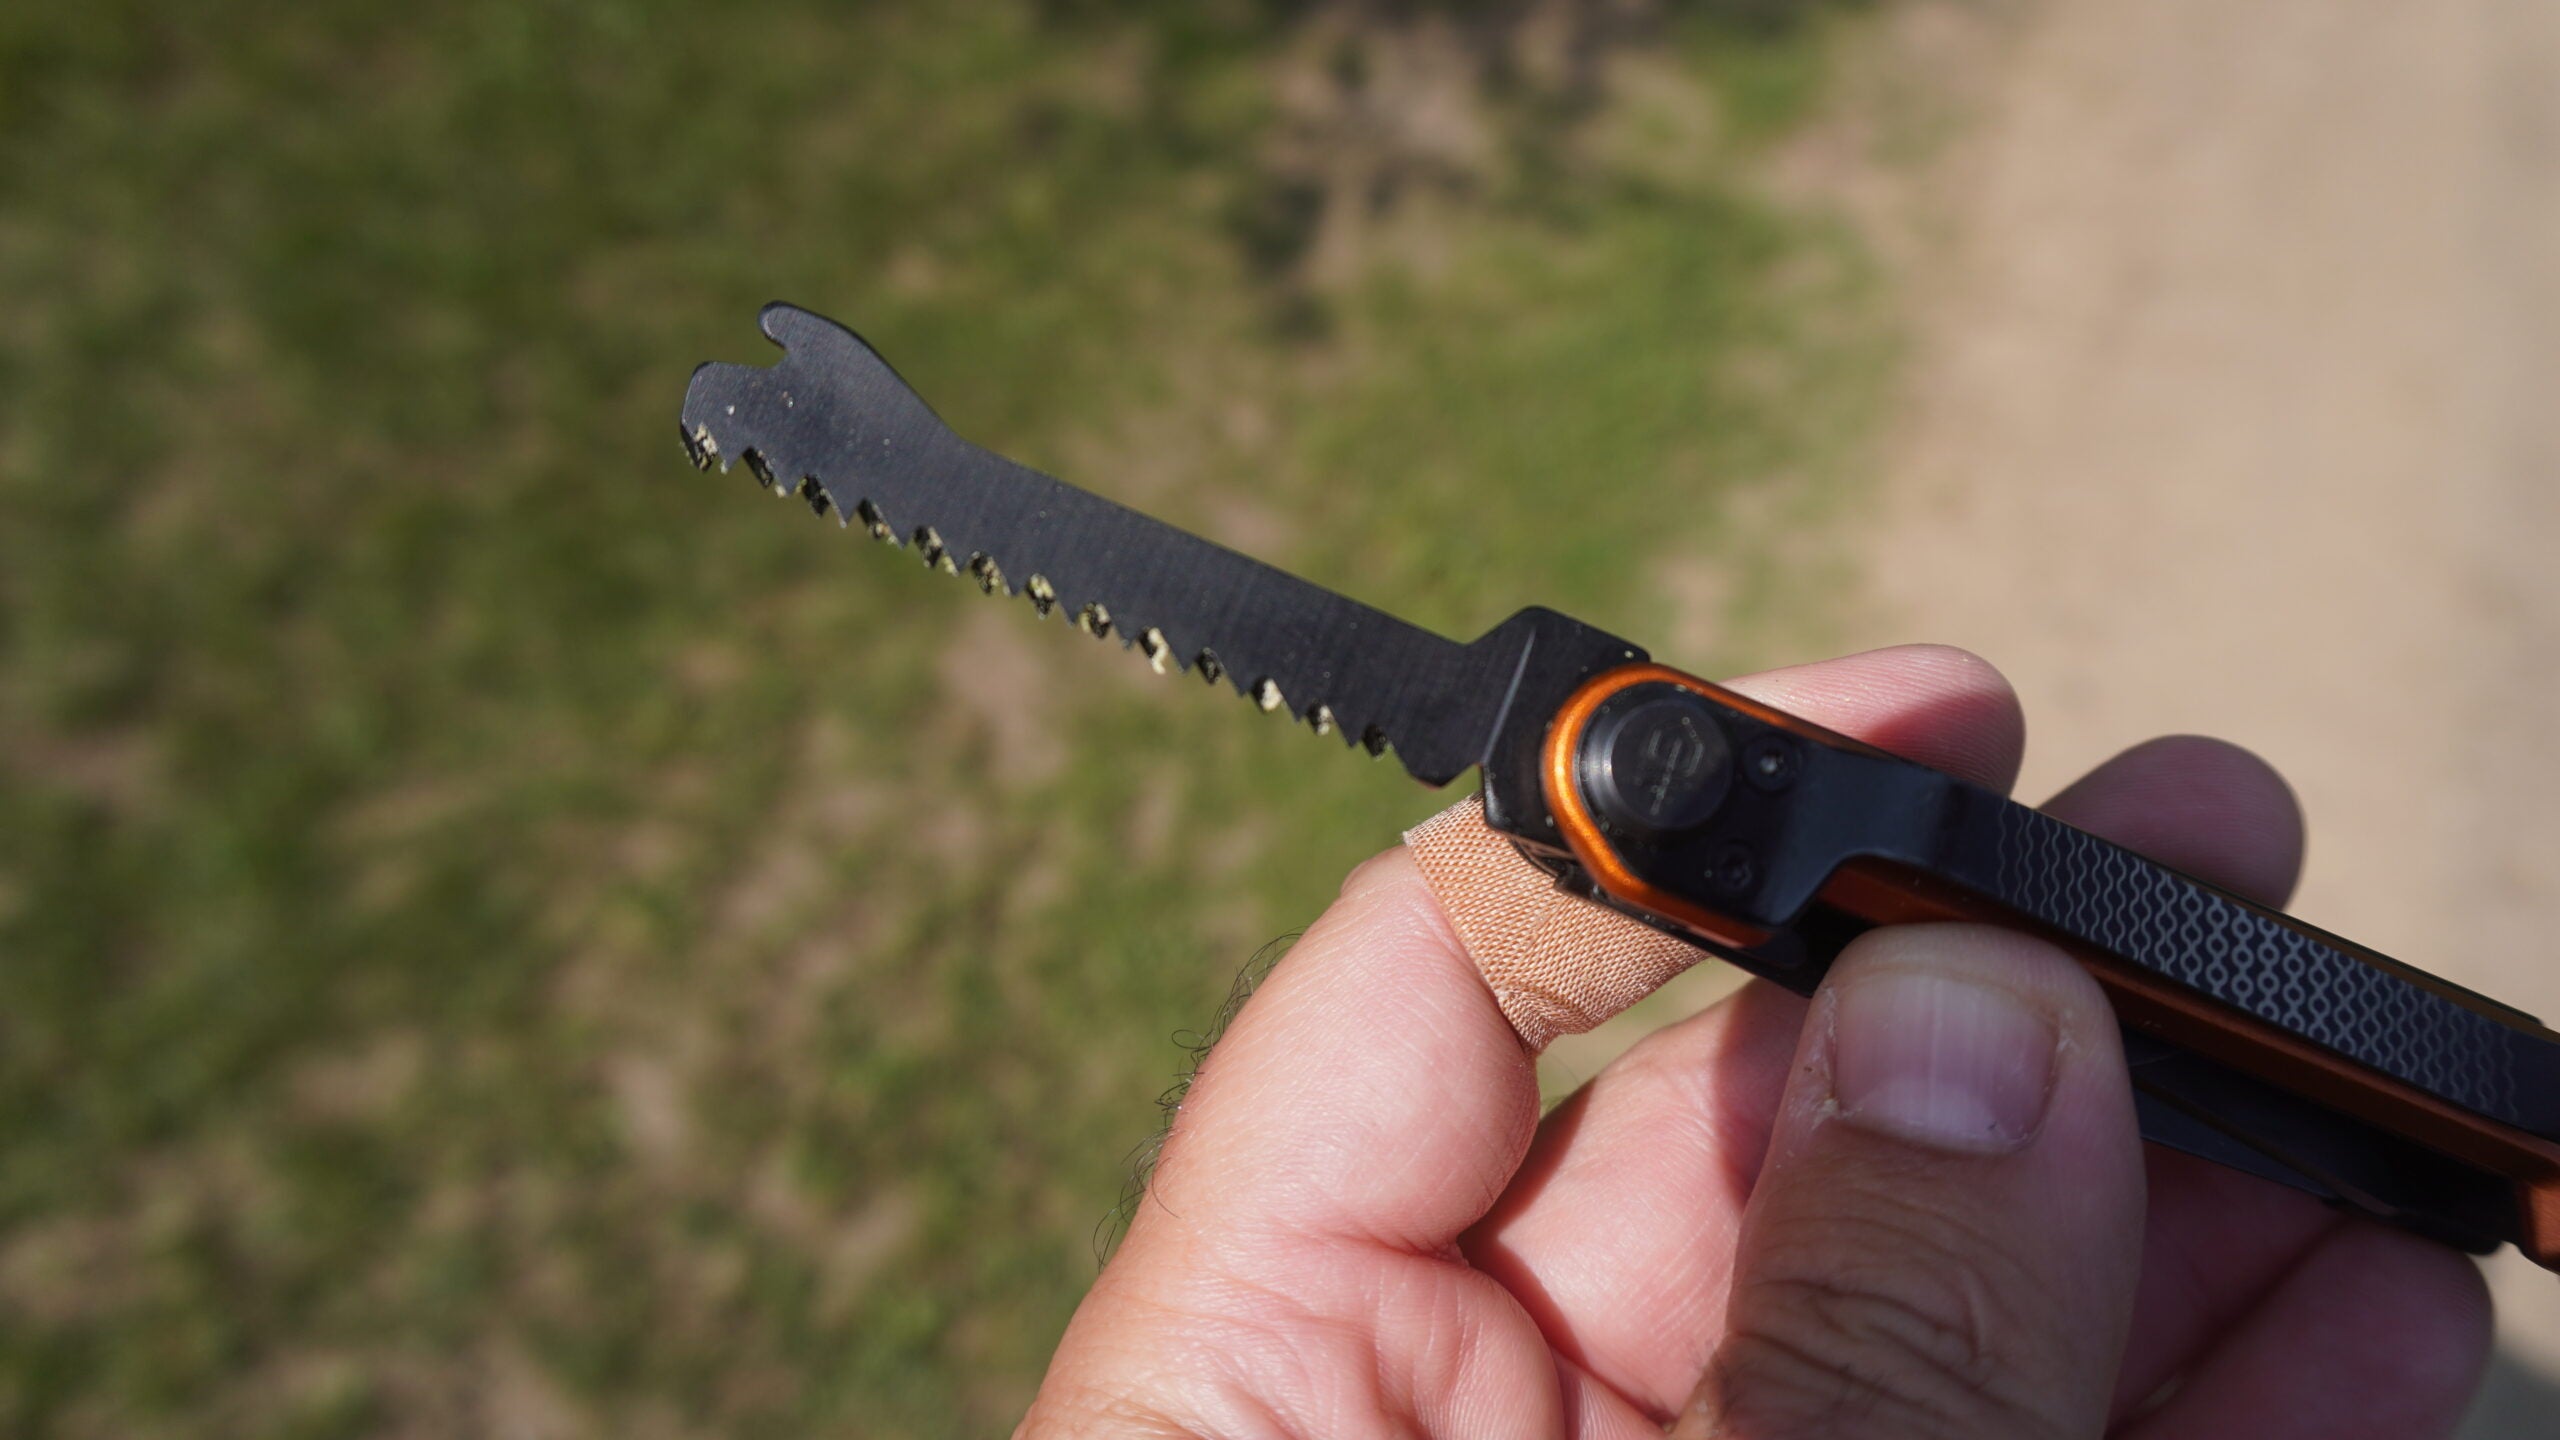 The saw is tiny, but surprisingly sharp and functional. Travis Smola